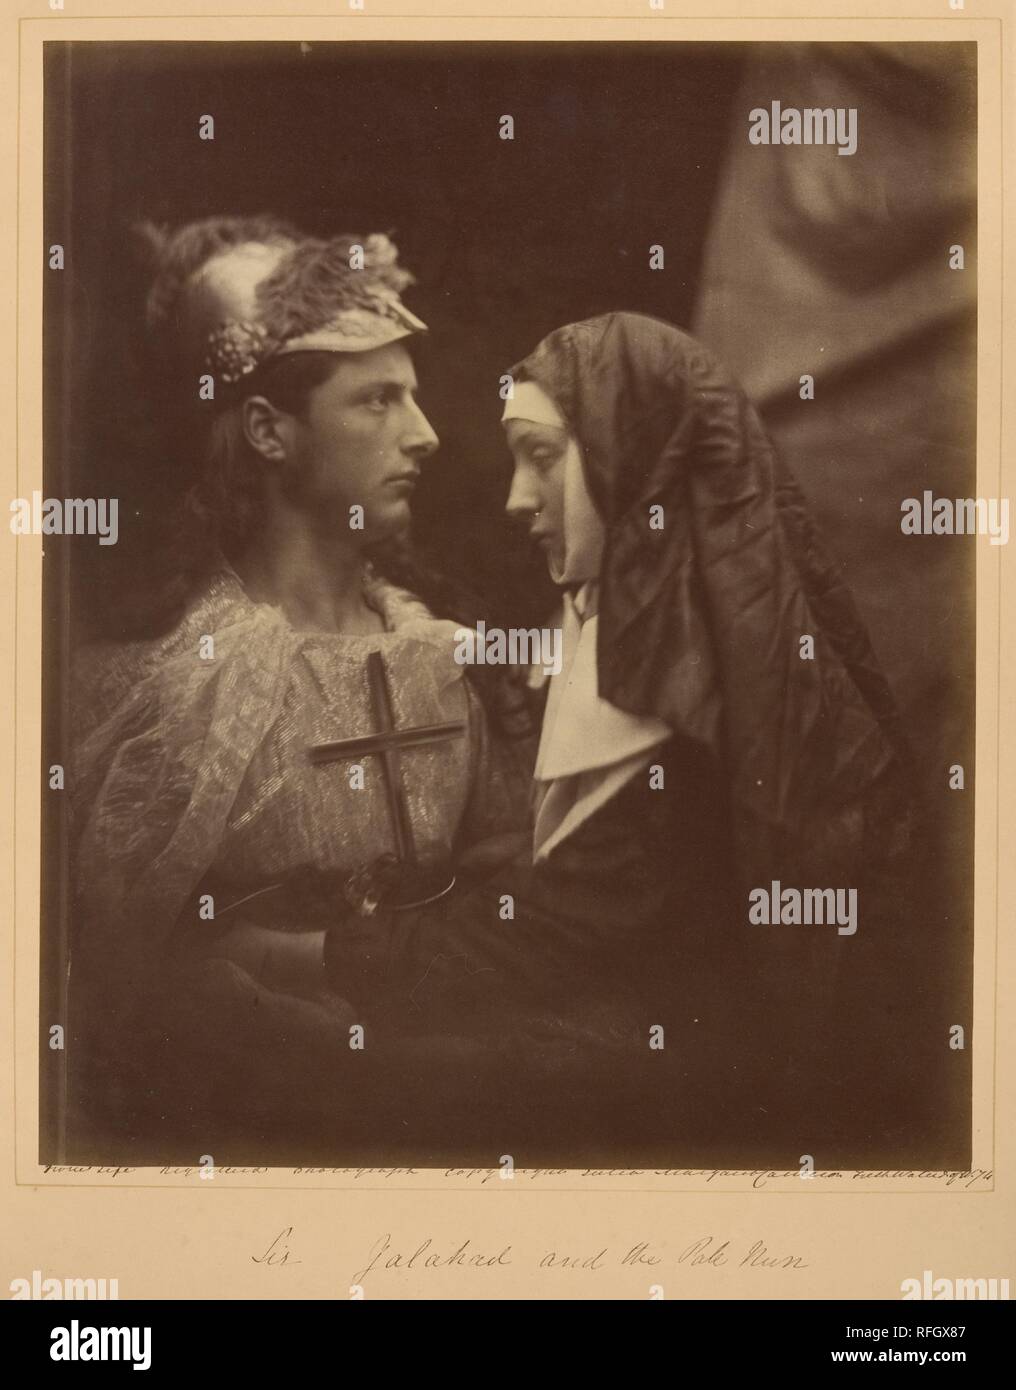 Sir Galahad and the Pale Nun. Artist: Julia Margaret Cameron (British (born India), Calcutta 1815-1879 Kalutara, Ceylon). Dimensions: 33.2 x 27.5 cm (13 1/16 x 10 13/16 in. ). Date: 1874.  In 1874 Tennyson asked Cameron to make photographic illustrations for a new edition of his Idylls of the King, a recasting of the Arthurian legends. Responding that both knew that 'it is immortality to me to be bound up with you,' Cameron willingly accepted the assignment. Costuming family and friends, she made some 245 exposures to arrive at the handful she wanted for the book. Ultimately--and predictably-- Stock Photo